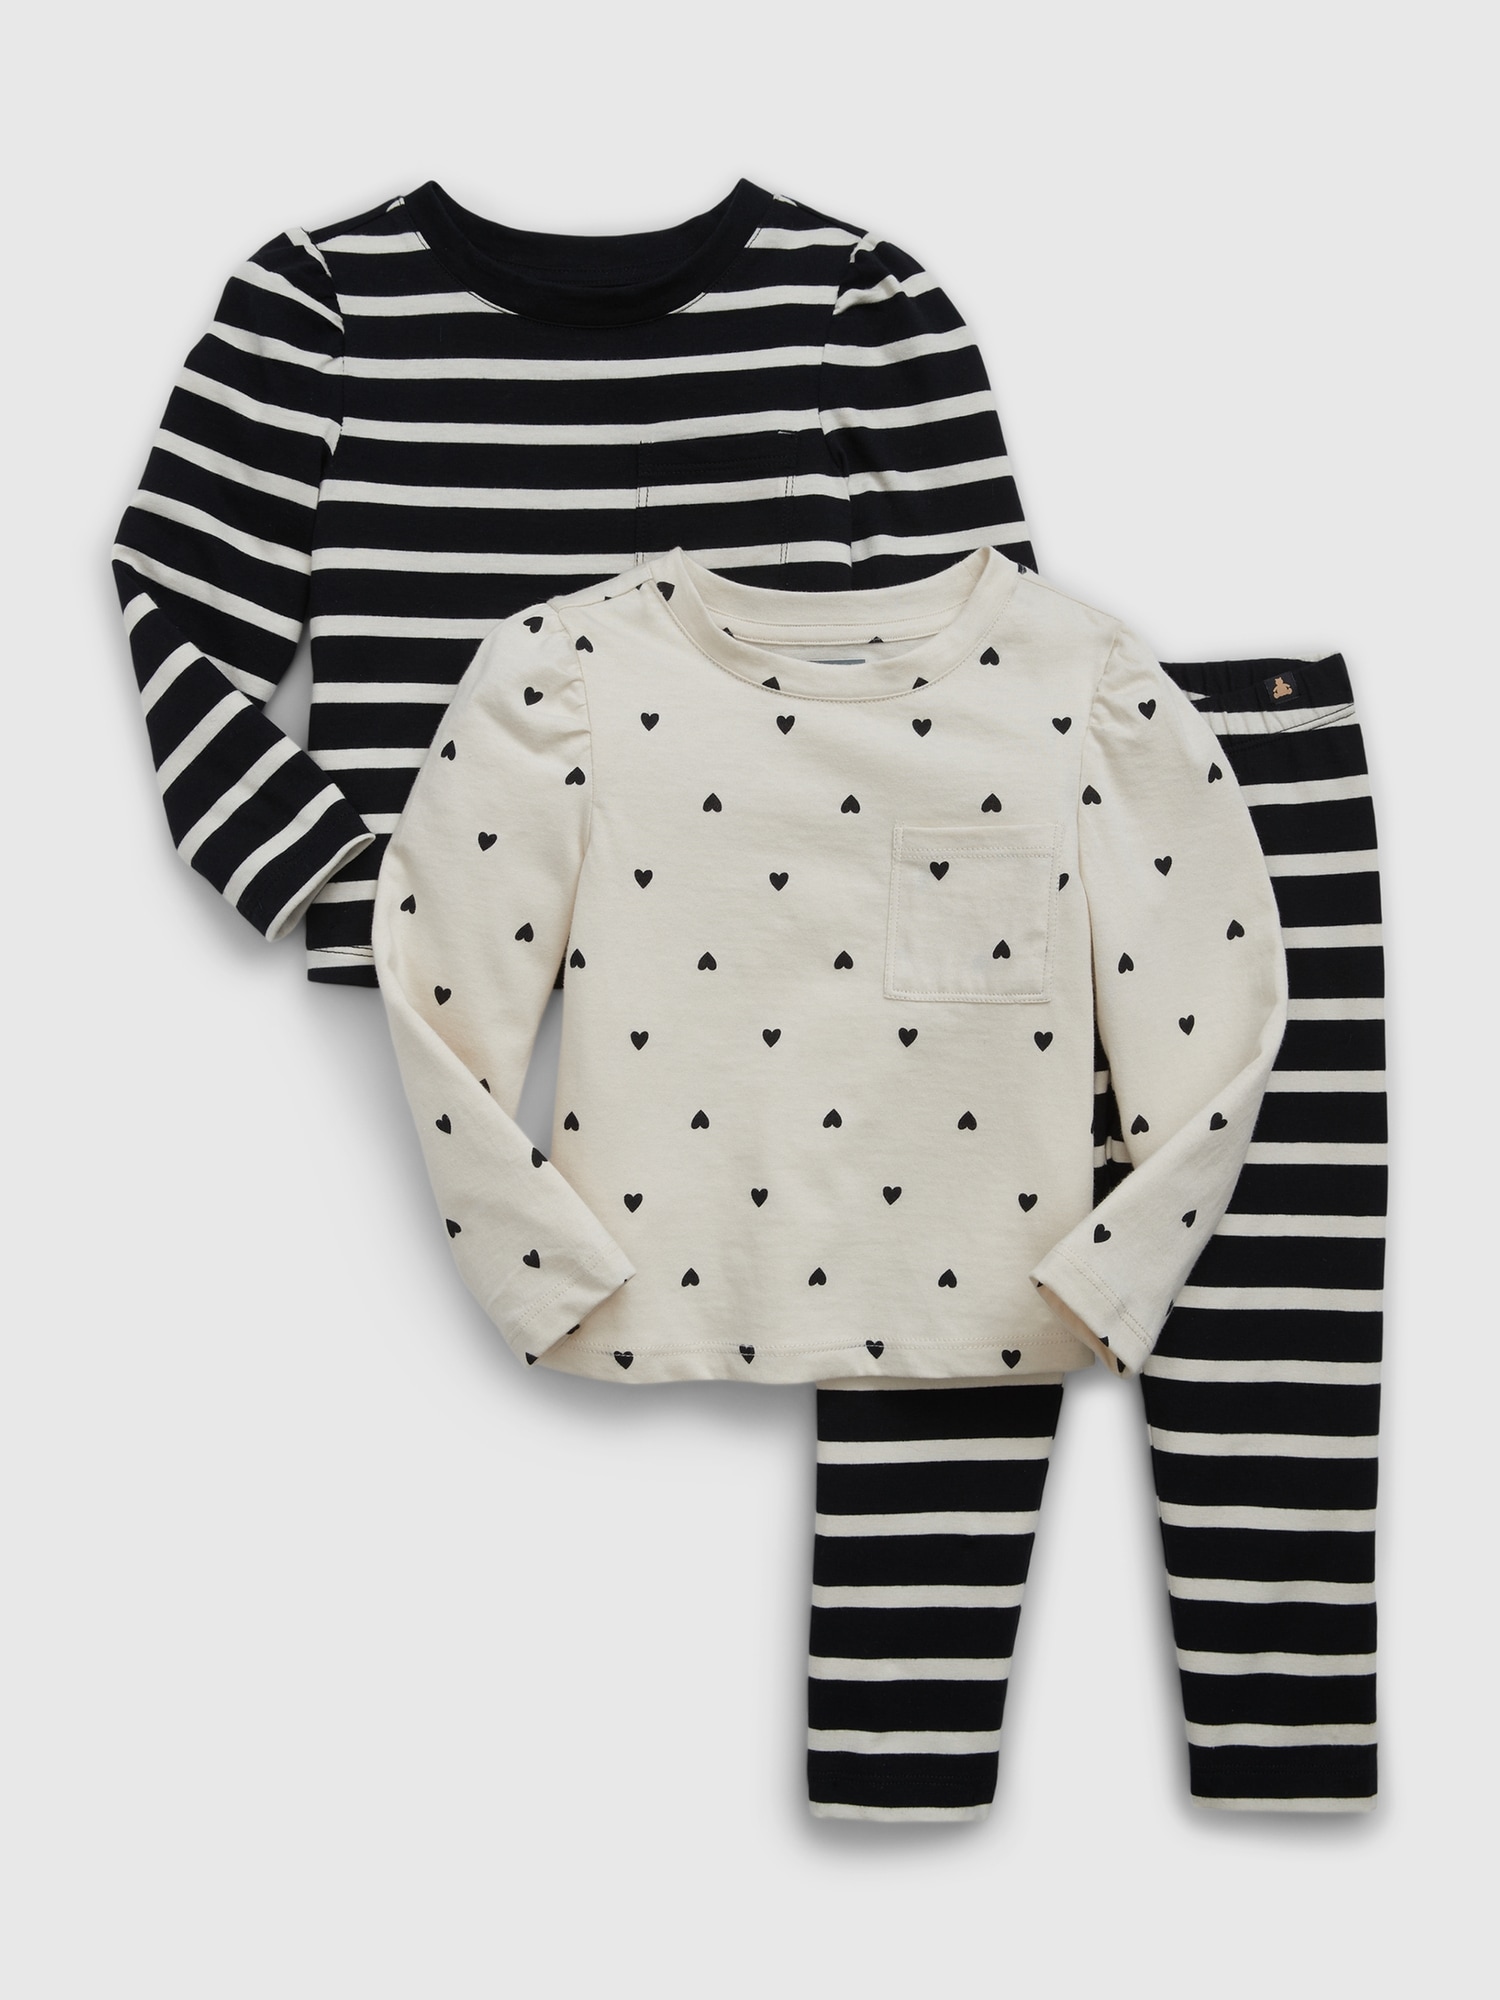 Toddler Organic Cotton Mix and Match Three-Piece Outfit Set